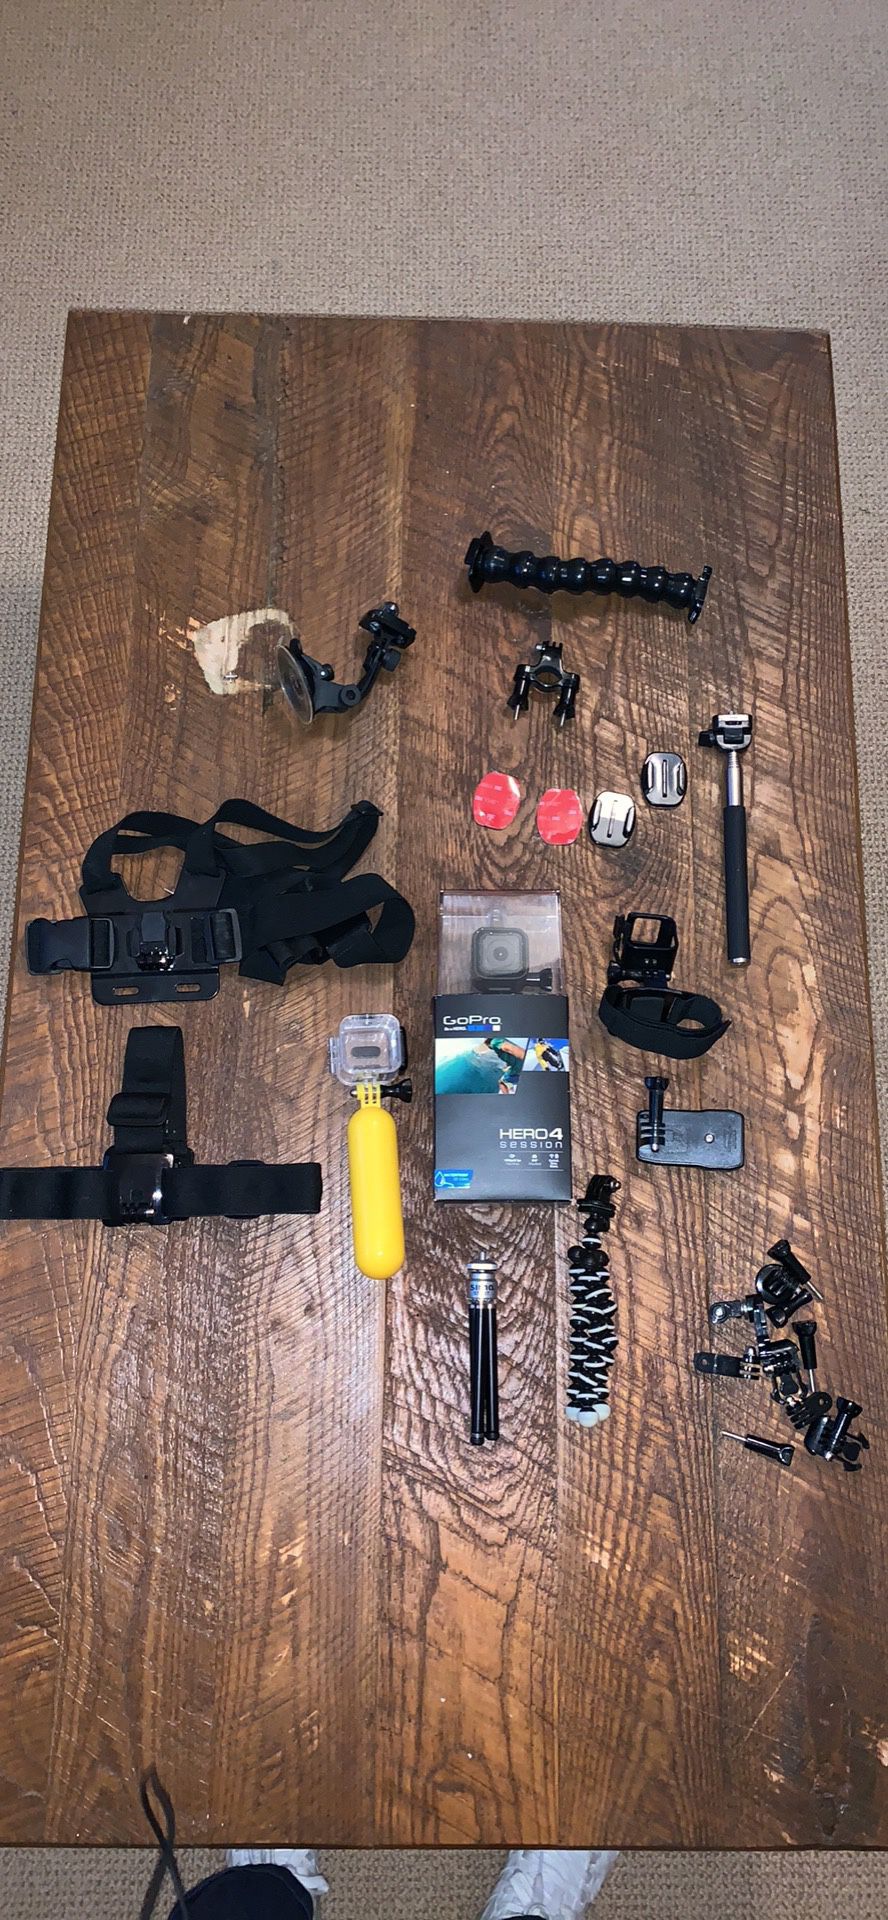 GoPro hero 4 session with a bundle of 10+ accessories